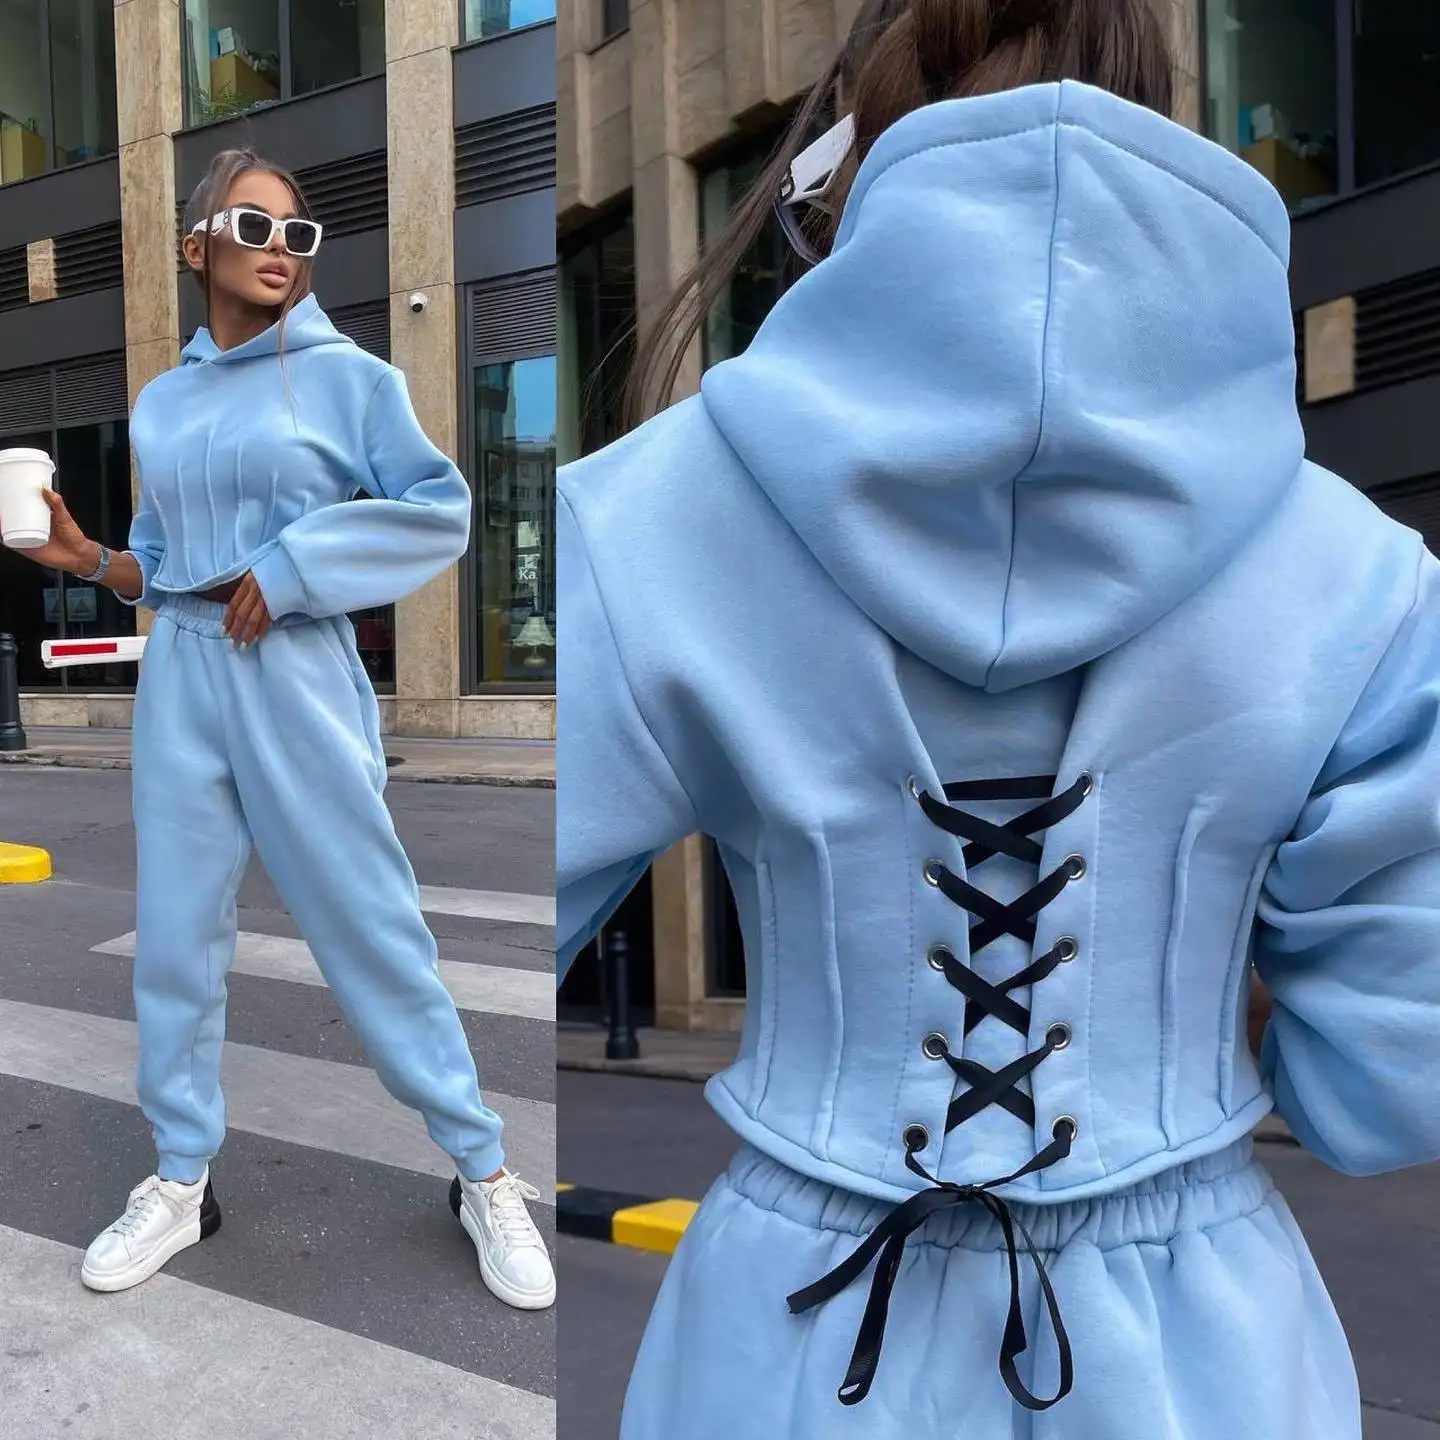 2022 Autumn Lace Up Hooded Sweatshirt Two Piece Women Long Sleeve Crop Tops Elastic Waist Pant Female Set Casual 2 piece Suits